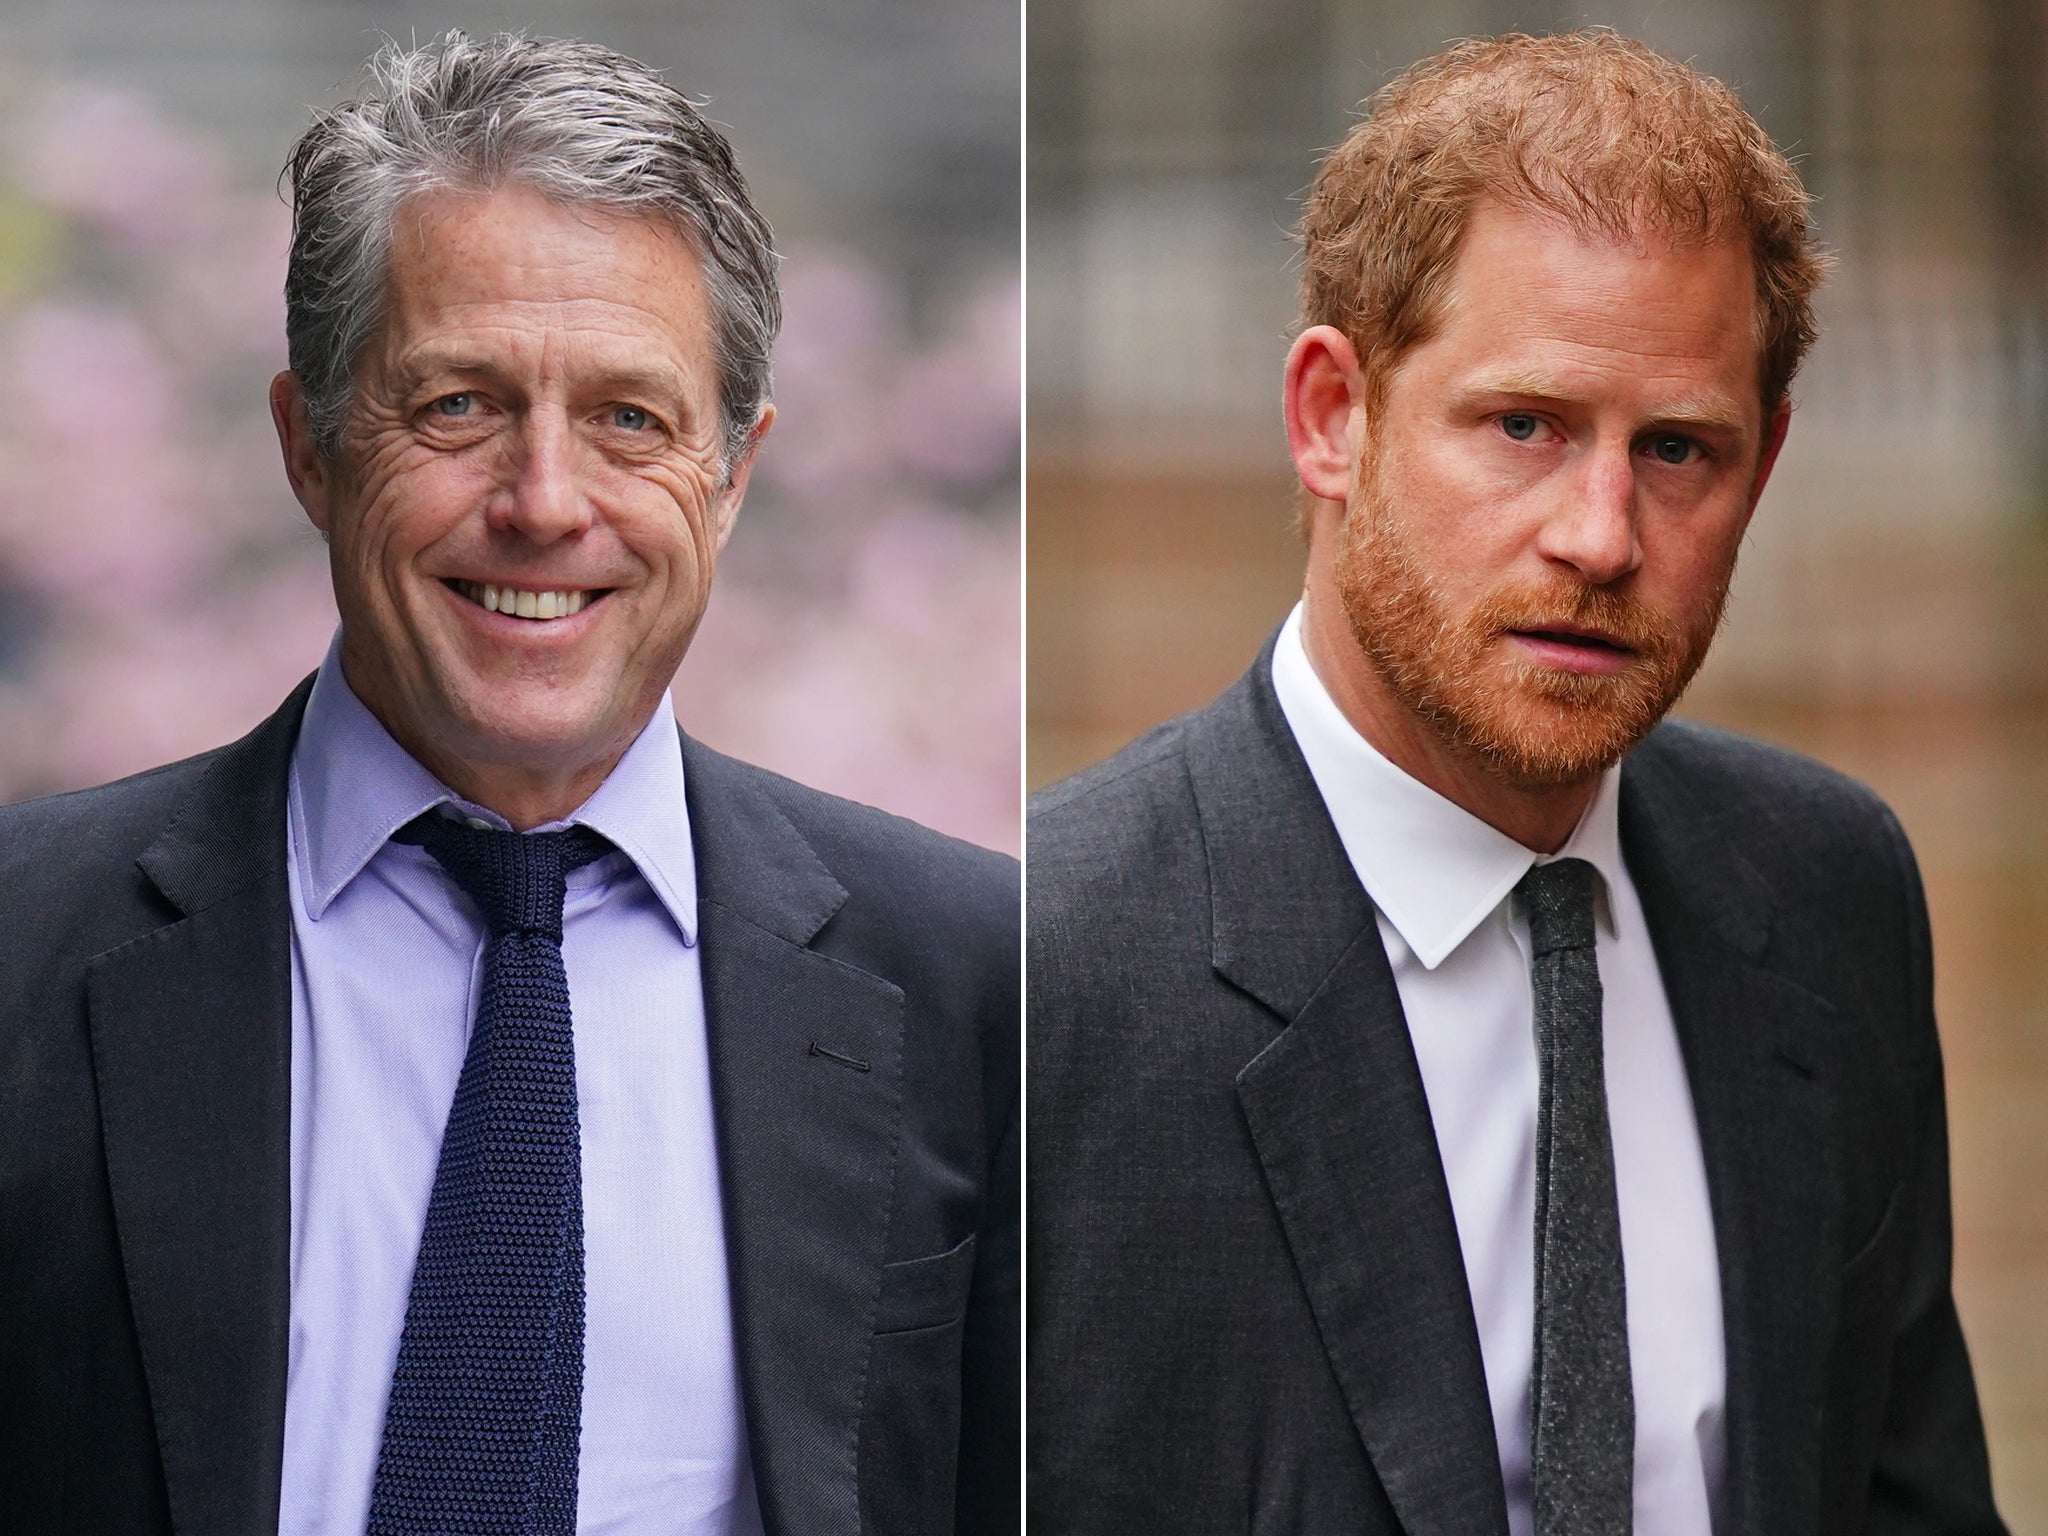 Hugh Grant attended court in the final day of the hearing. Prince Harry attended last month